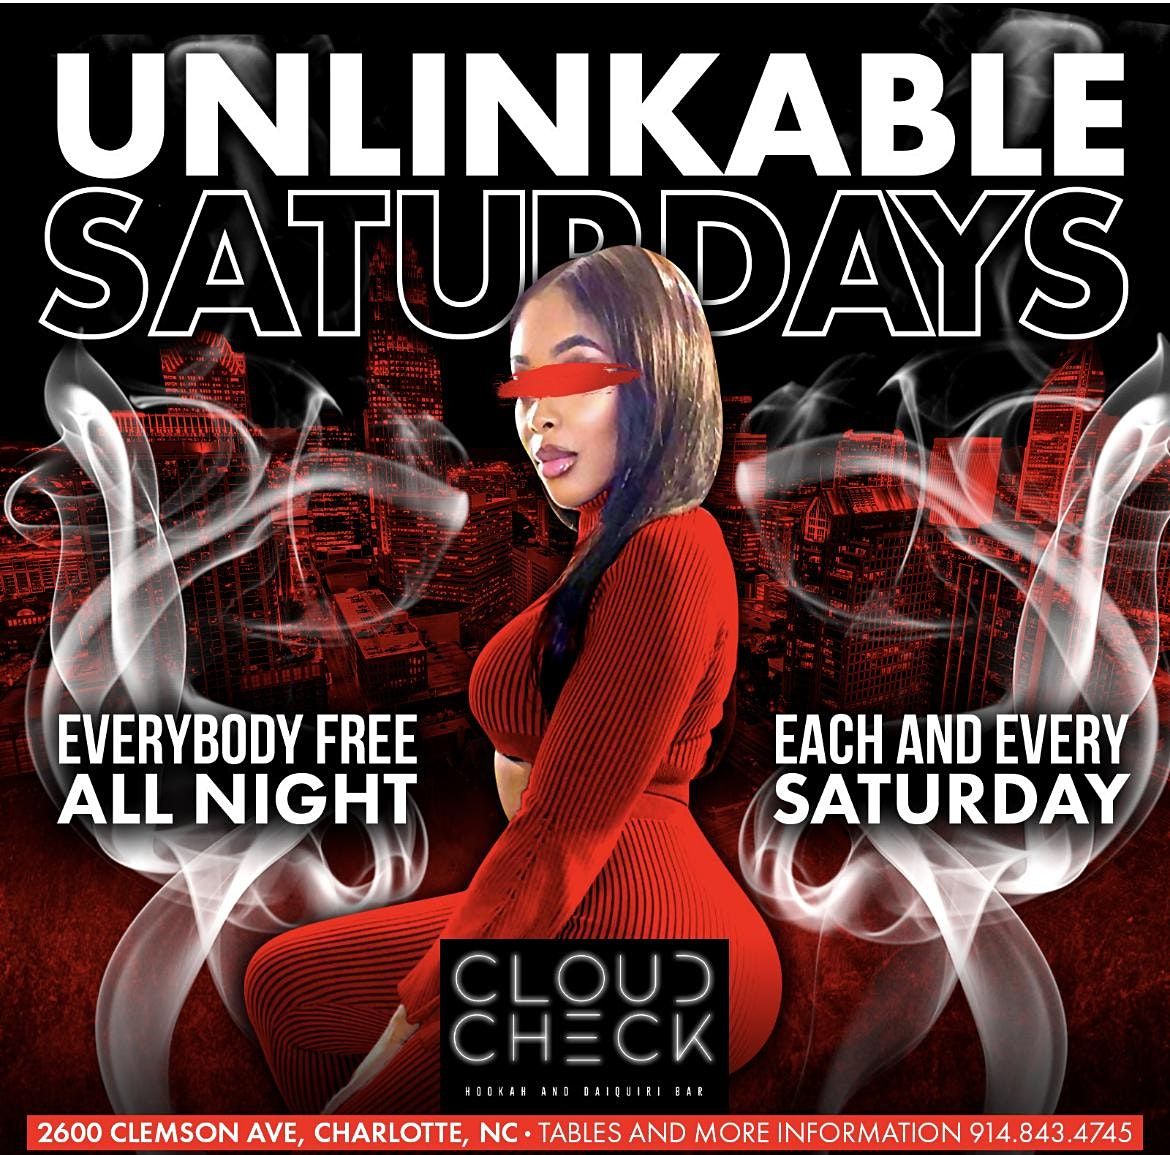 UNLINKABLE SATURDAYS AT CLOUD CHECK LOUNGE! EVERYBODY FREE ALL NIGHT